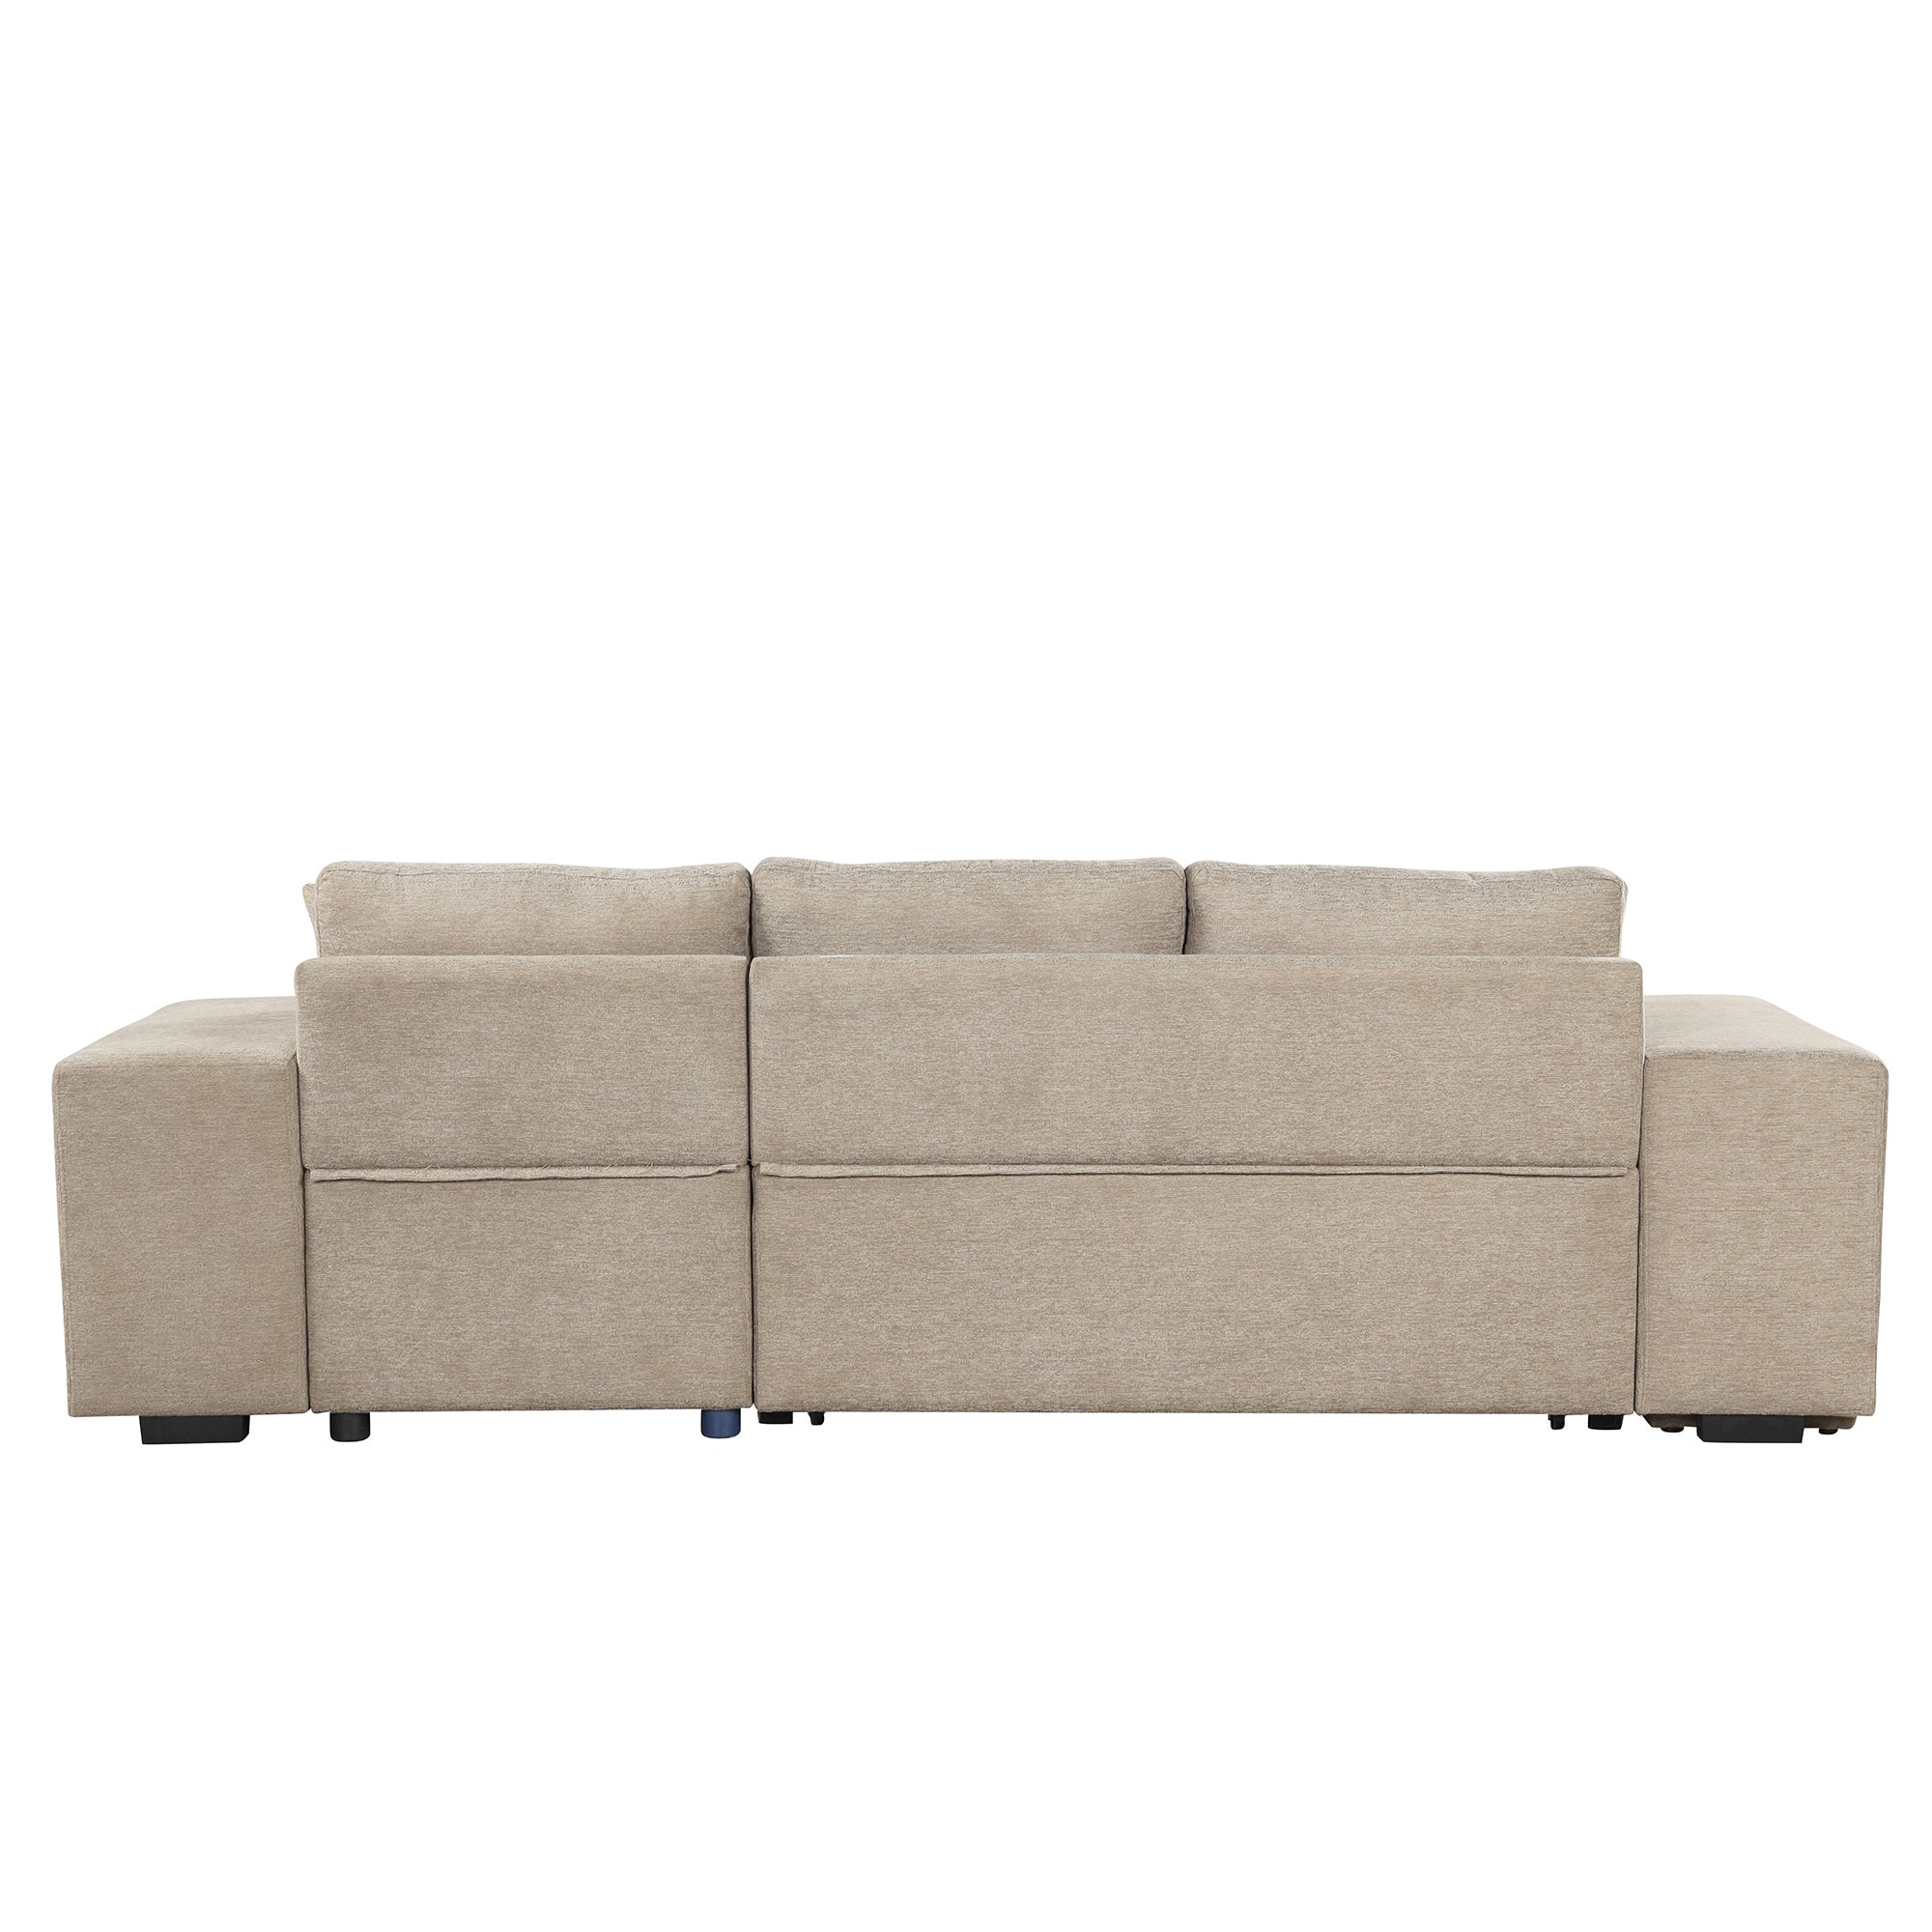 104" Brown Modern L-Shaped Sectional Sofa Bed with Storage-Sleeper Sectionals-American Furniture Outlet